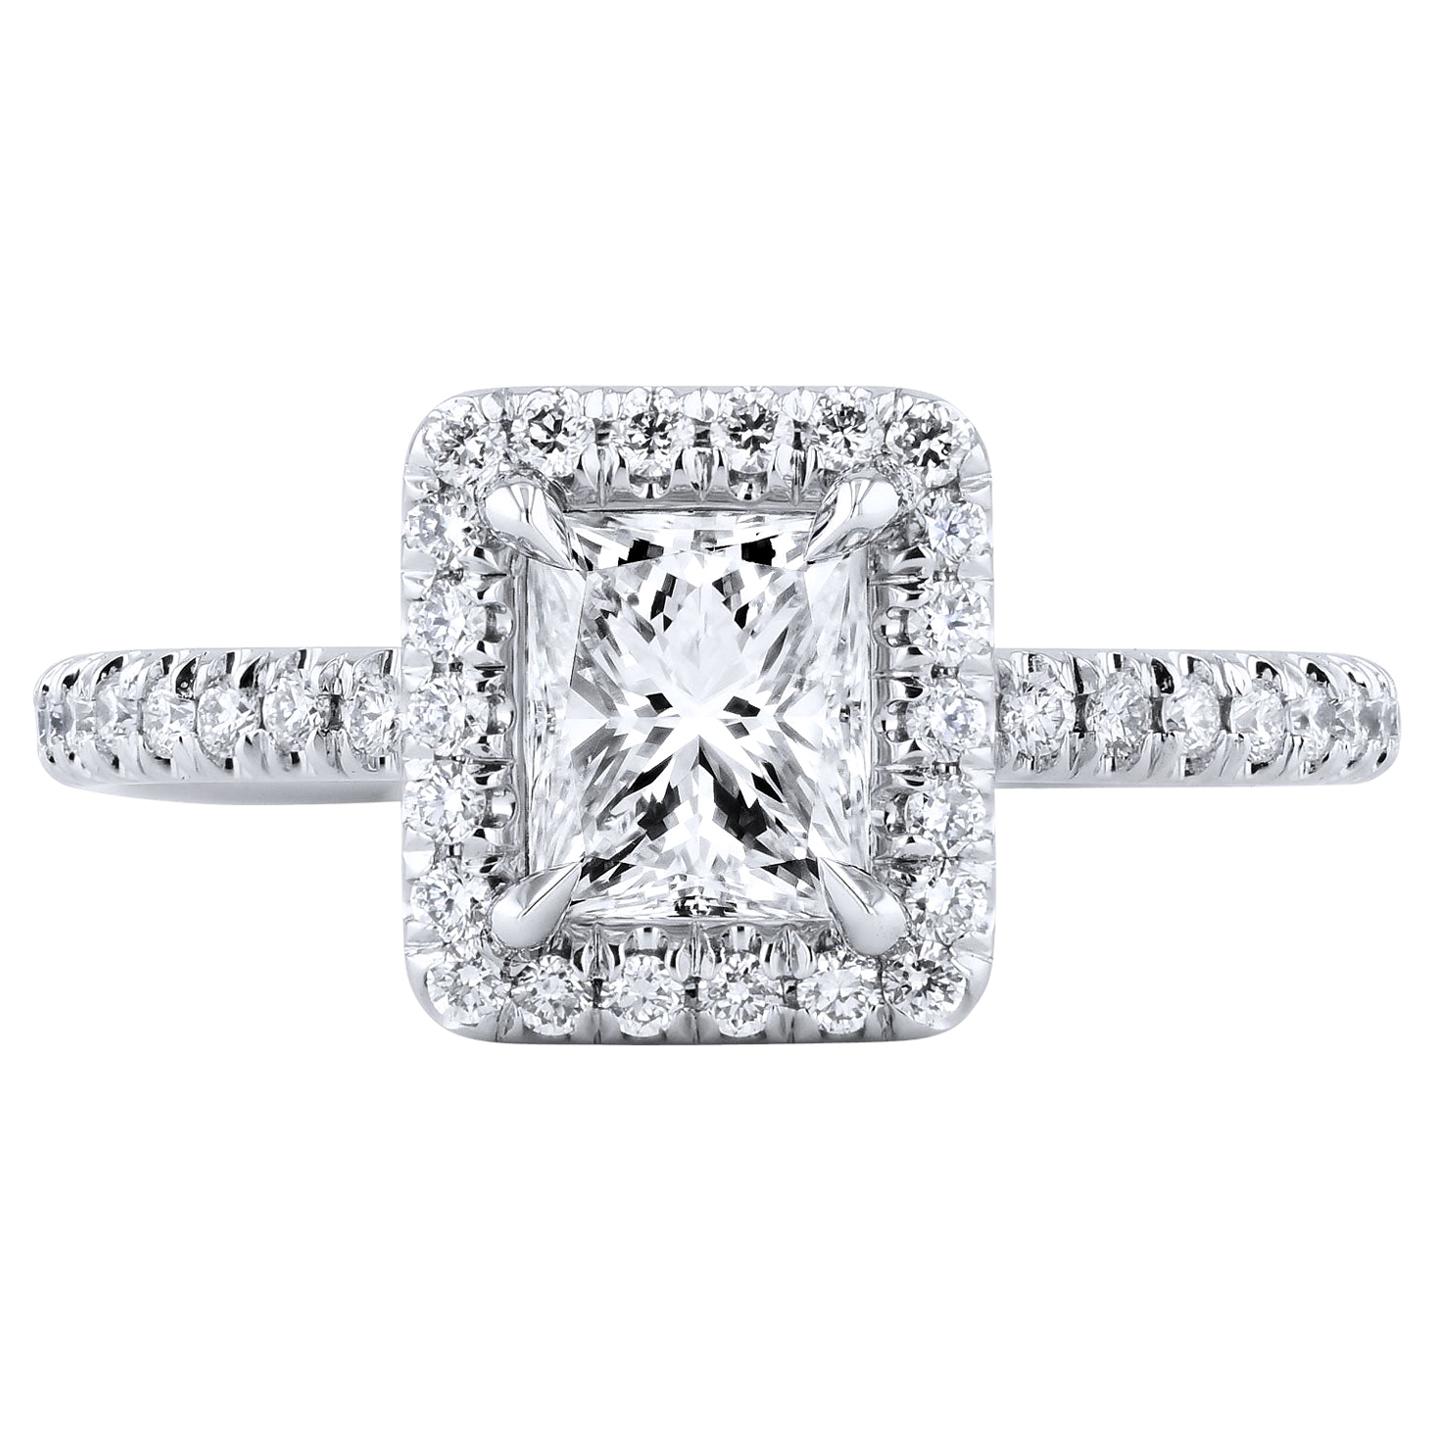 GIA Certified 0.92 Carat Radiant Cut Diamond Engagement Ring Handmade by H&H